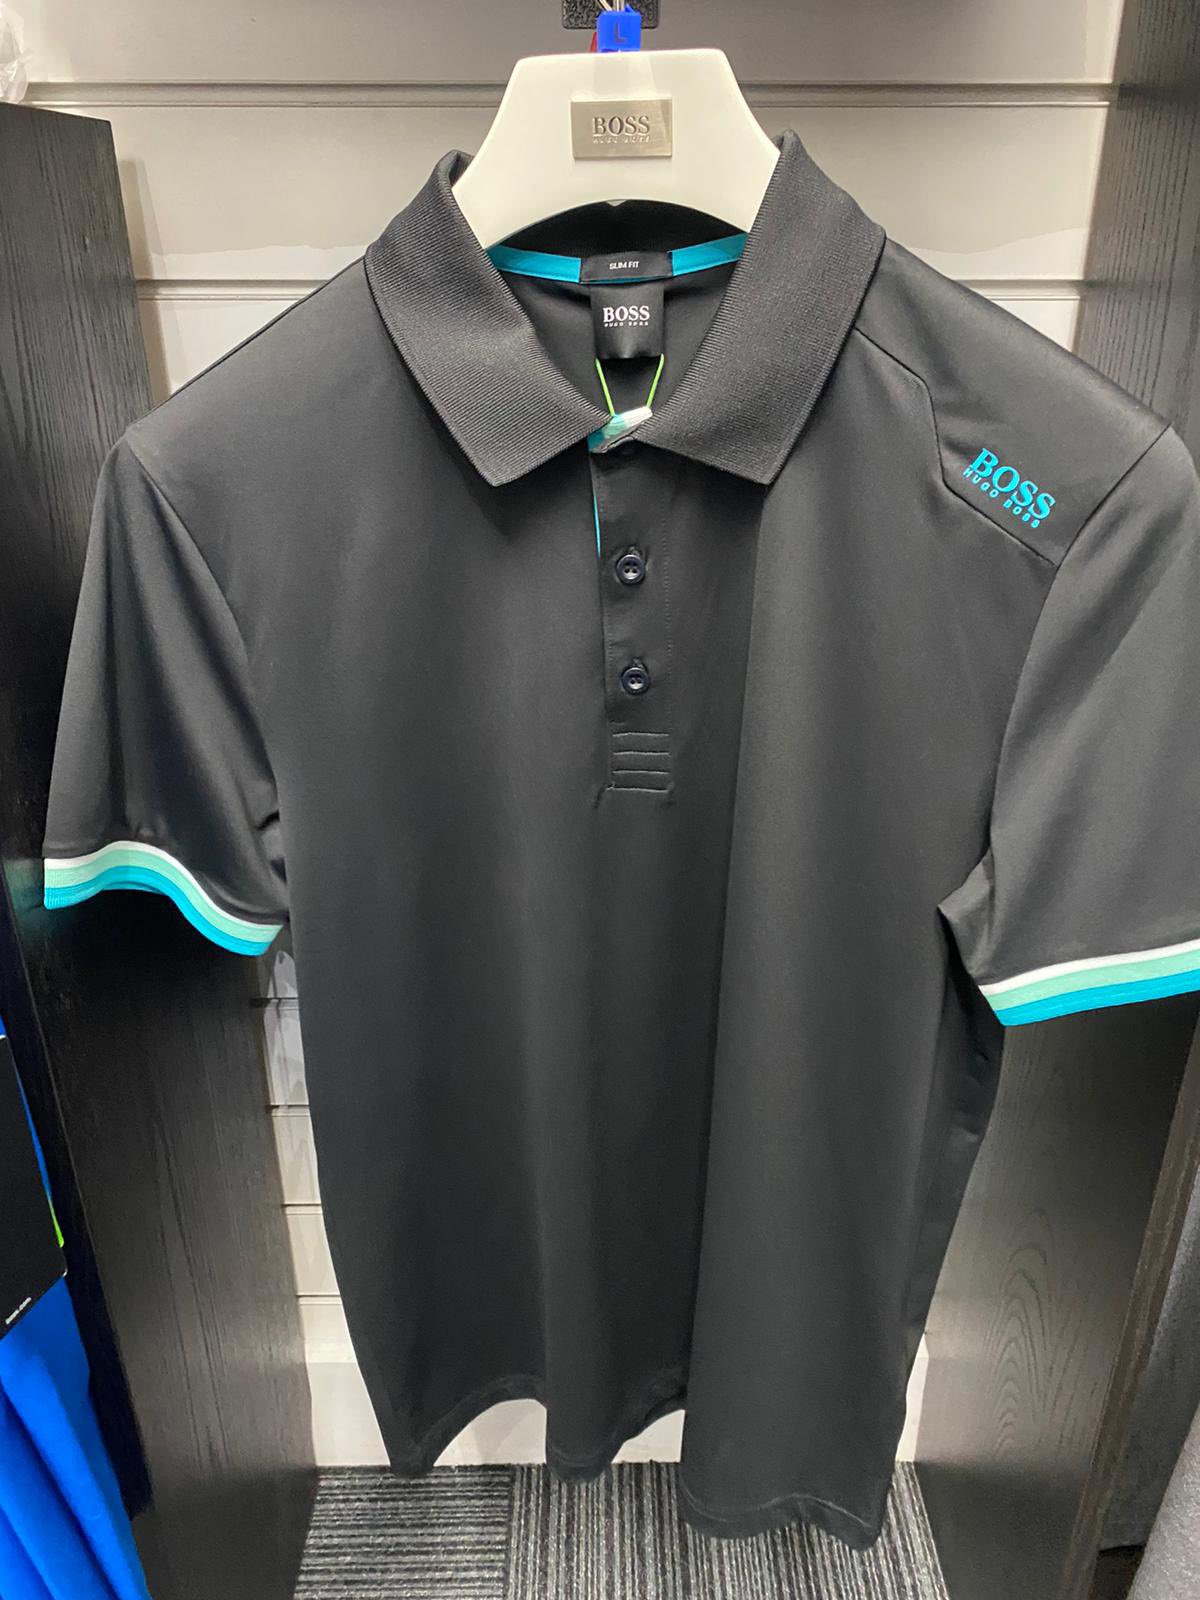 homoseksueel calorie steeg Woodsomehallproshop on Twitter: "⚫️BLACK FRIDAY DEAL 3⚫️ HUGO BOSS POLO !  Navy was £119 now £89, Black polo was £119 now £79 !! Sizes available upon  request ! #martinkaymer #lookgood #supportlocal https://t.co/ajCpxTx25g" /  Twitter